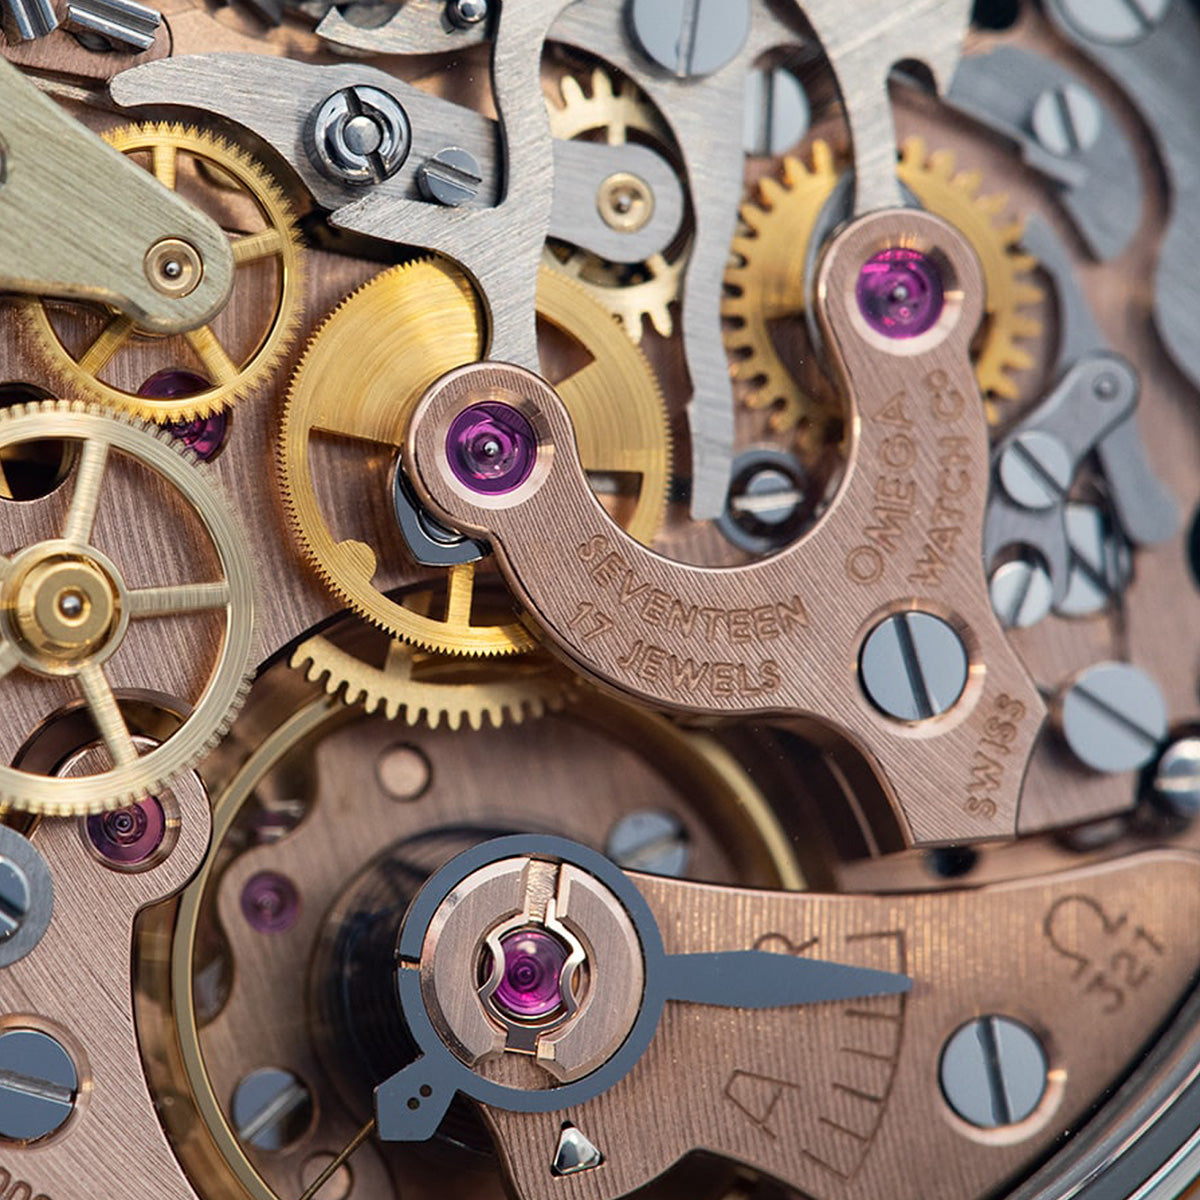 Omega calibers – The super-powers behind the Omega watch faces Part 2